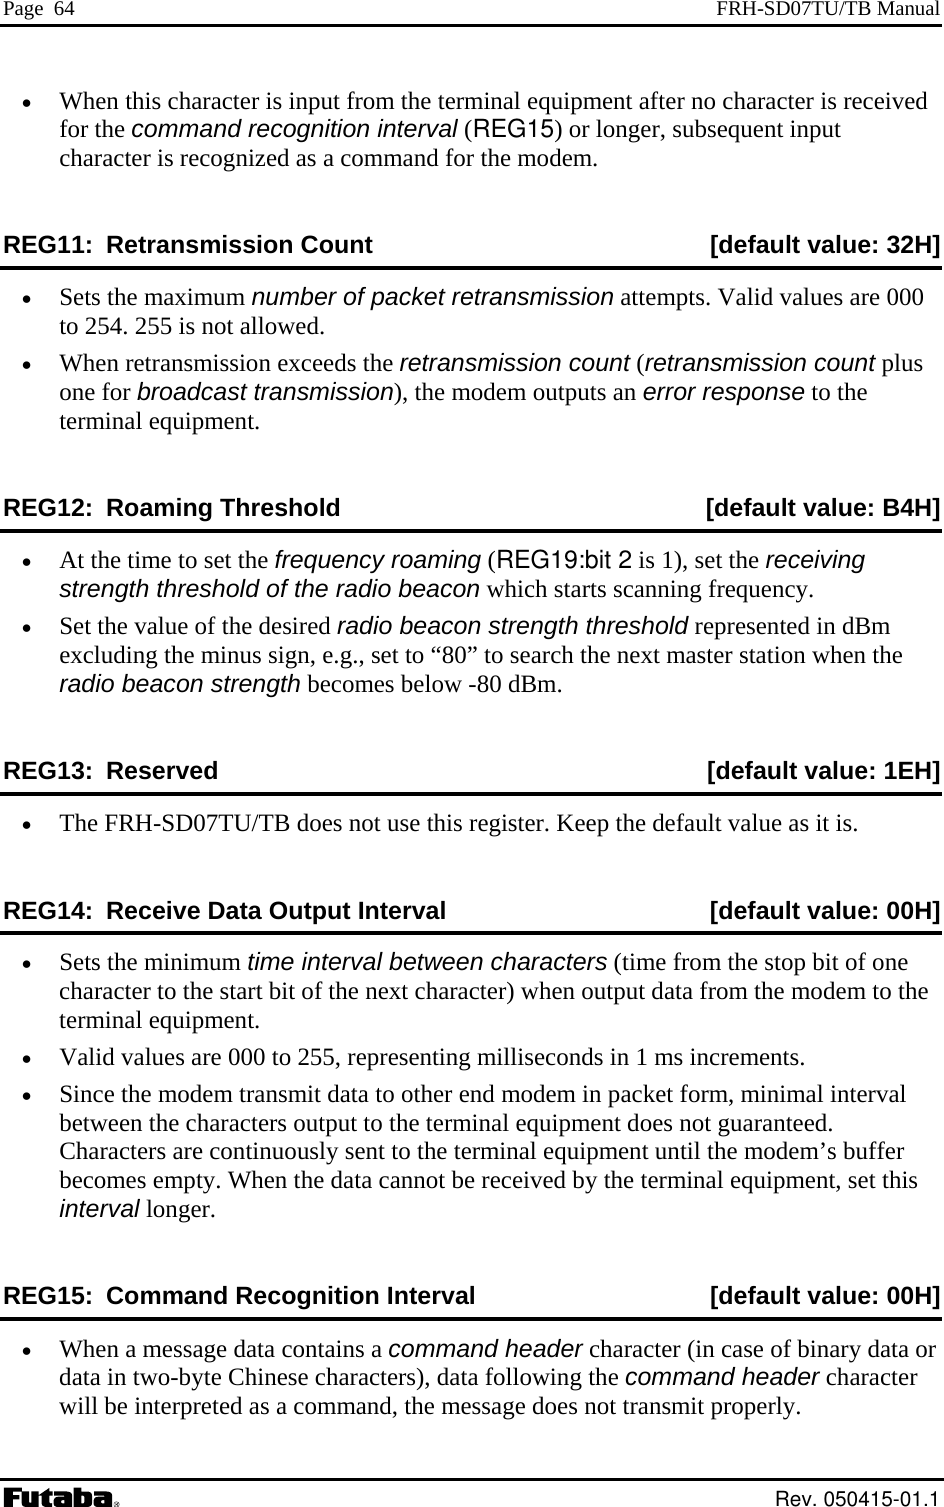 Page  64  FRH-SD07TU/TB Manual •  When this character is input from the terminal equipment after no character is received for the command recognition interval REG15) or longer, subsequent input character is rec an  th emREG11:  Retransmission Coun [default value: 32H]  (d rogniz  as a commed  fo e m do . t •  Sets the maximum n mber o acke etran issio ttemp . Valid values are 000 to 254. 255 is not allowed. •  When retransmission exceeds the retransmission count (retransmission count plus one for broadcast transmission), the modem outputs an error response to the terminal equipmentREG12: Roaming Thr [default value: B4H] u f p t r sm n a ts. eshold •  At the tim  (REG19:bit 2 , set the receiving •  h threshold represented in dBm excluding the minus sign, e.g., set to “80” to search the next master station when the s below -80 dBm. REG ] e to set the frequency roaming  is 1)strength threshold of the radio beacon which starts scanning frequency. Set the value of the desired radio beacon strengtradio beacon strength become13:  Reserved  [default value: 1EH•  The FRH-SD07TU/TB does not use this register. Keep the default value as it is. R 0H] EG14:  Receive Data Output Interval  [default value: 0•  p bit of one character to the start bit of the next character) when output data from the modem to the 55, representing milliseconds in 1 ms incremval between the characters output to the terminal equipment does not guaranteed. Characters are continuously sent to the terminal equipment until the modem’s buffer hen the data cannot be received by the termintion Interval Sets the minimum time interval between characters (time from the stoterminal equipment. •  Valid values are 000 to 2 ents. •  Since the modem transmit data to other end modem in packet form, minimal interbecomes empty. W al equipment, set this interval longer. REG15:  Command Recogni [default value: 00H] •  When a message data contains a command header character (in case of binary data or data in two-byte Chinese characters), data following the command header character  message does not transmit properly. will be interpreted as a command, the Rev. 050415-01.1 